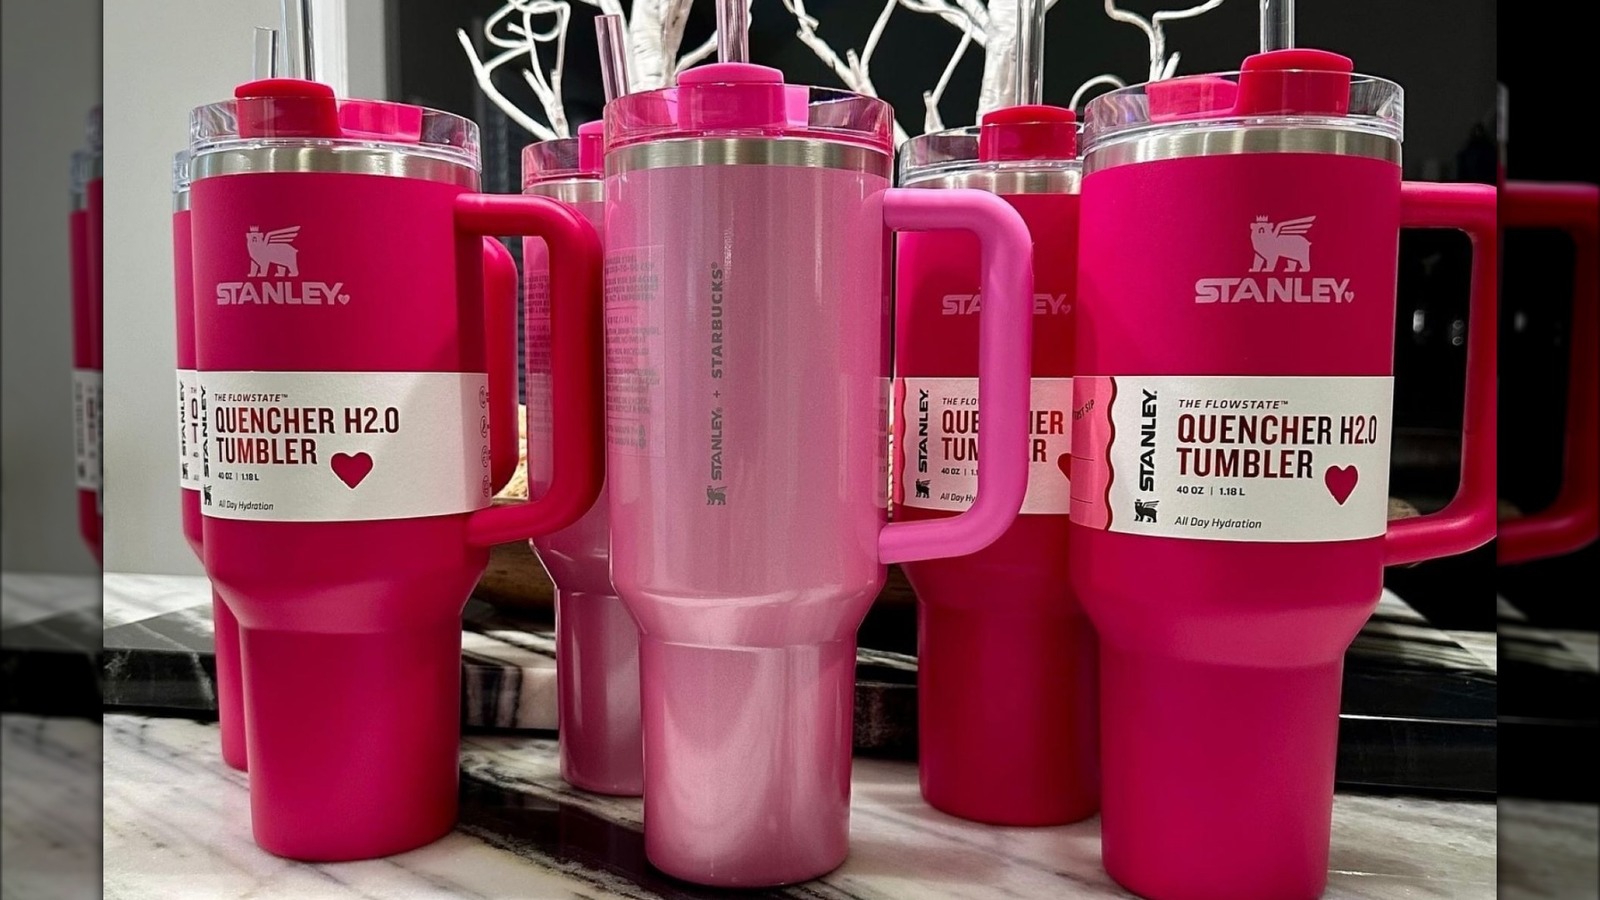 https://www.tastingtable.com/img/gallery/new-starbucks-x-stanley-pink-cup-is-an-instant-hit-at-target/l-intro-1704394750.jpg